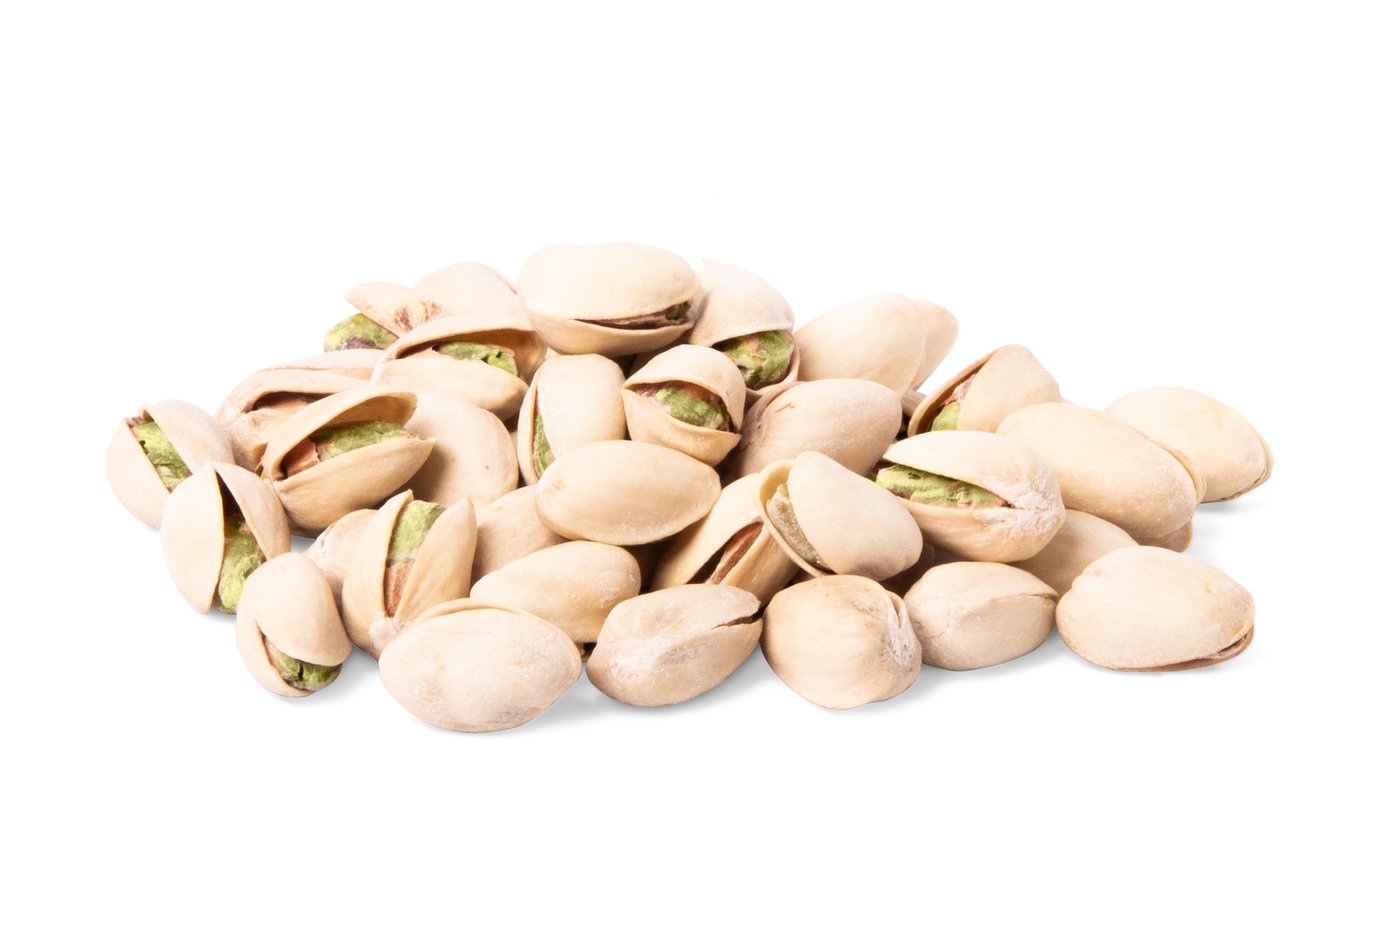 Roasted Pistachios (Salted, In Shell) image zoom